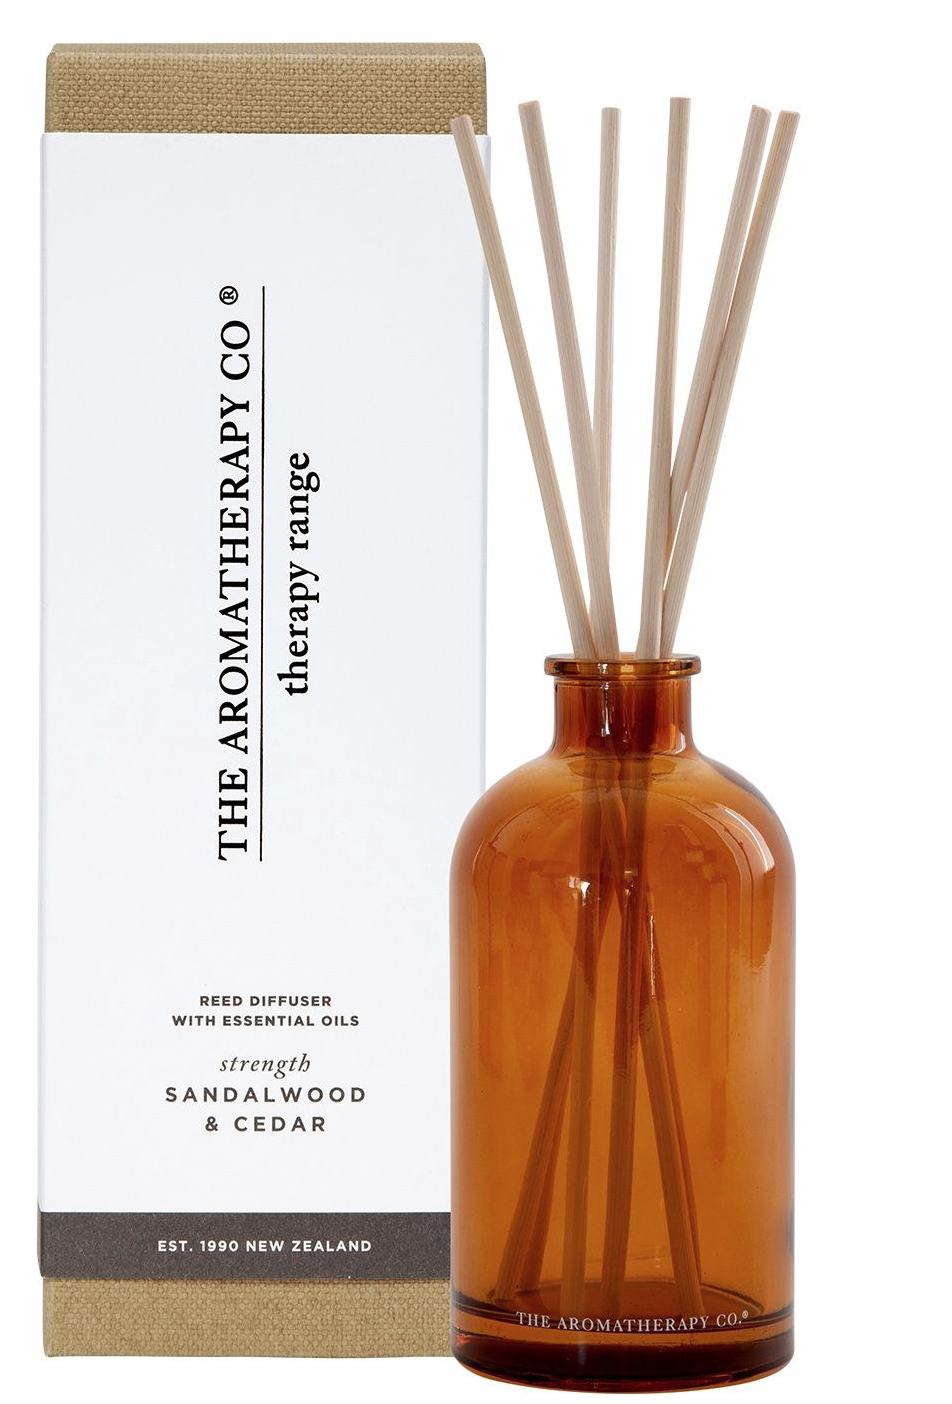 THE AROMATHERAPY CO ©
therapy range

REED DIFFUSER
WITH ESSENTIAL OILS

strength
SANDALWOOD
&amp; CEDAR

EST. 1990 NEW ZEALAND